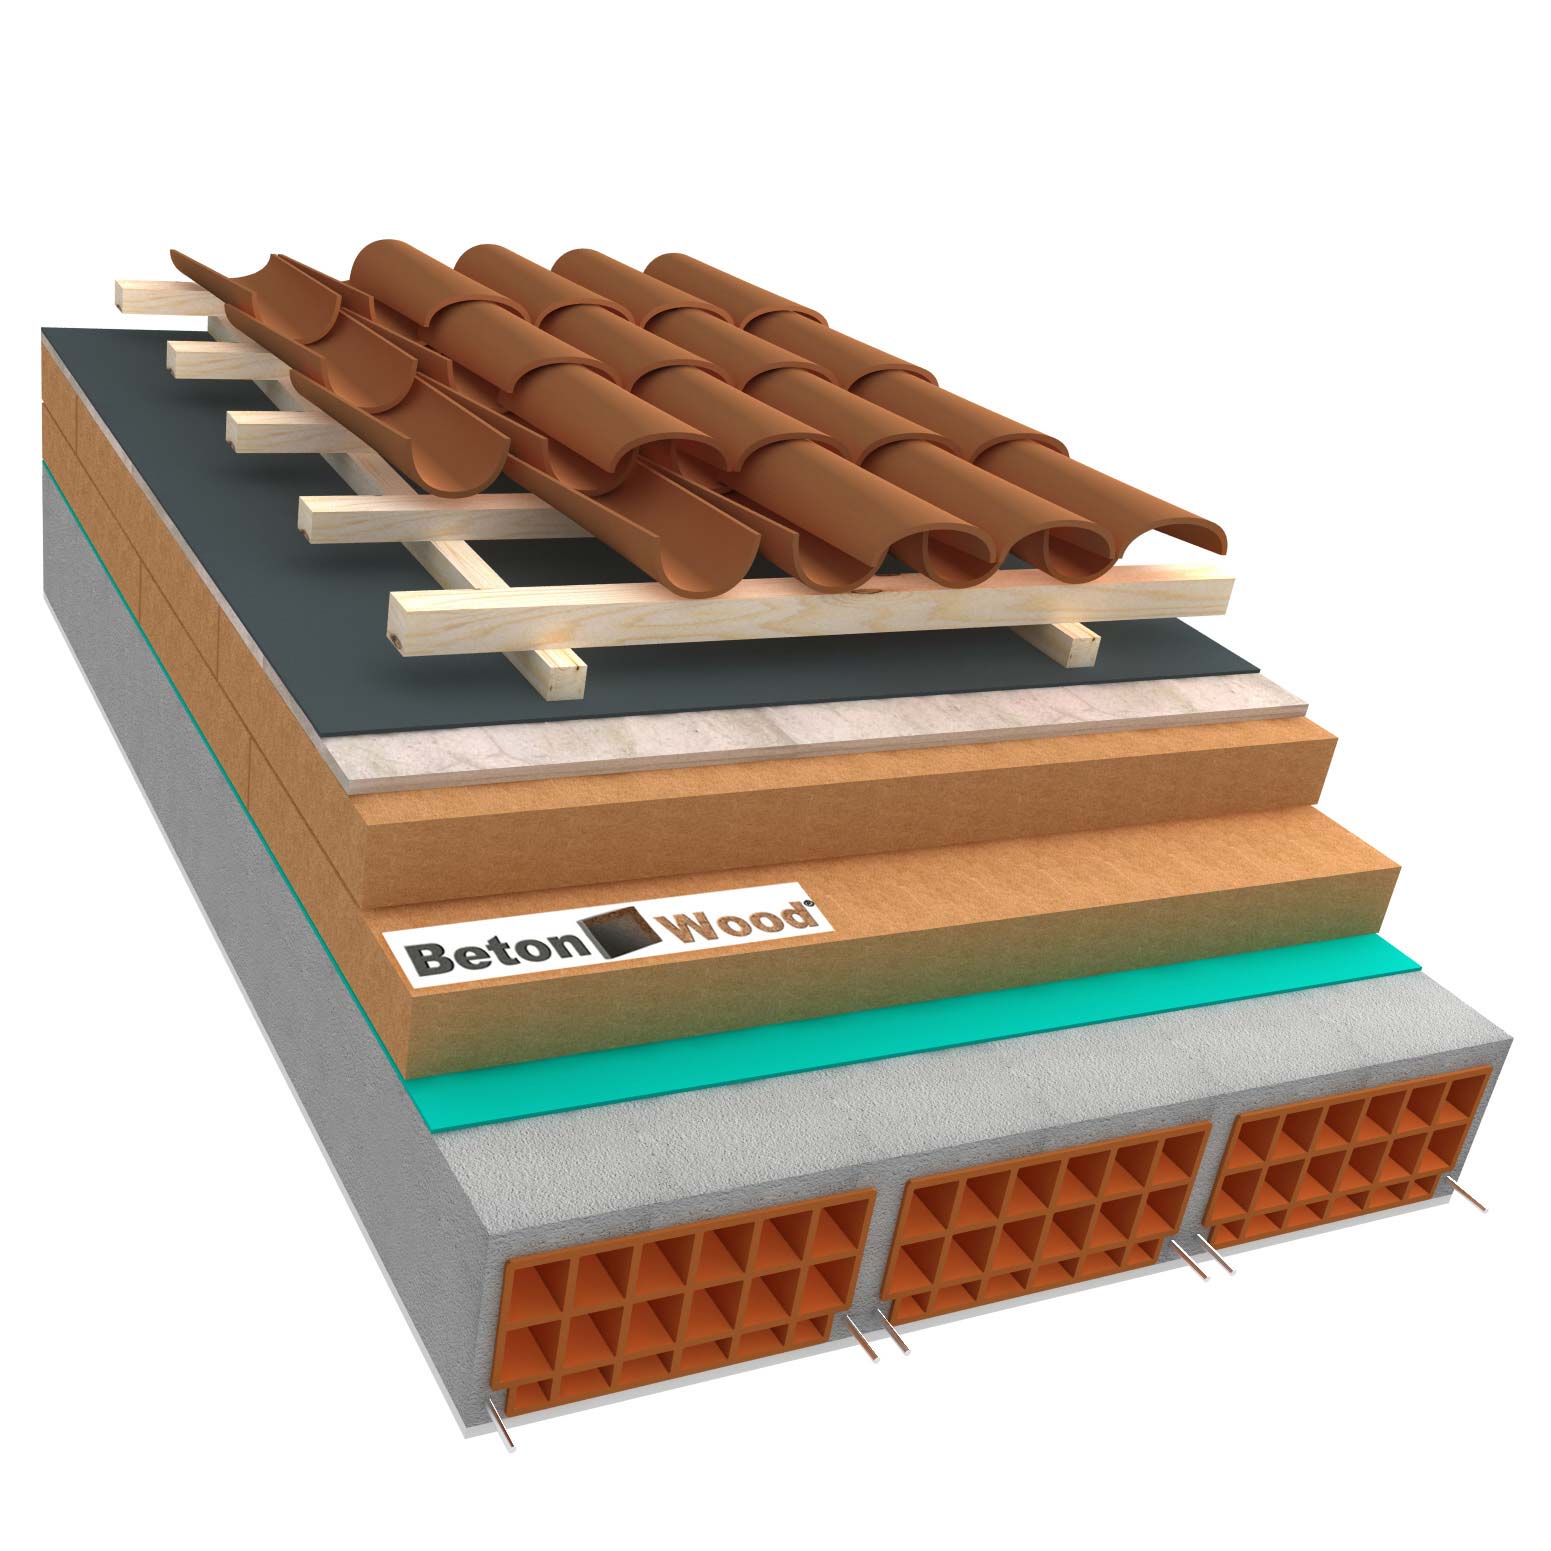 Ventilated roof with wood fiber Universal and cement bonded particle boards on concrete